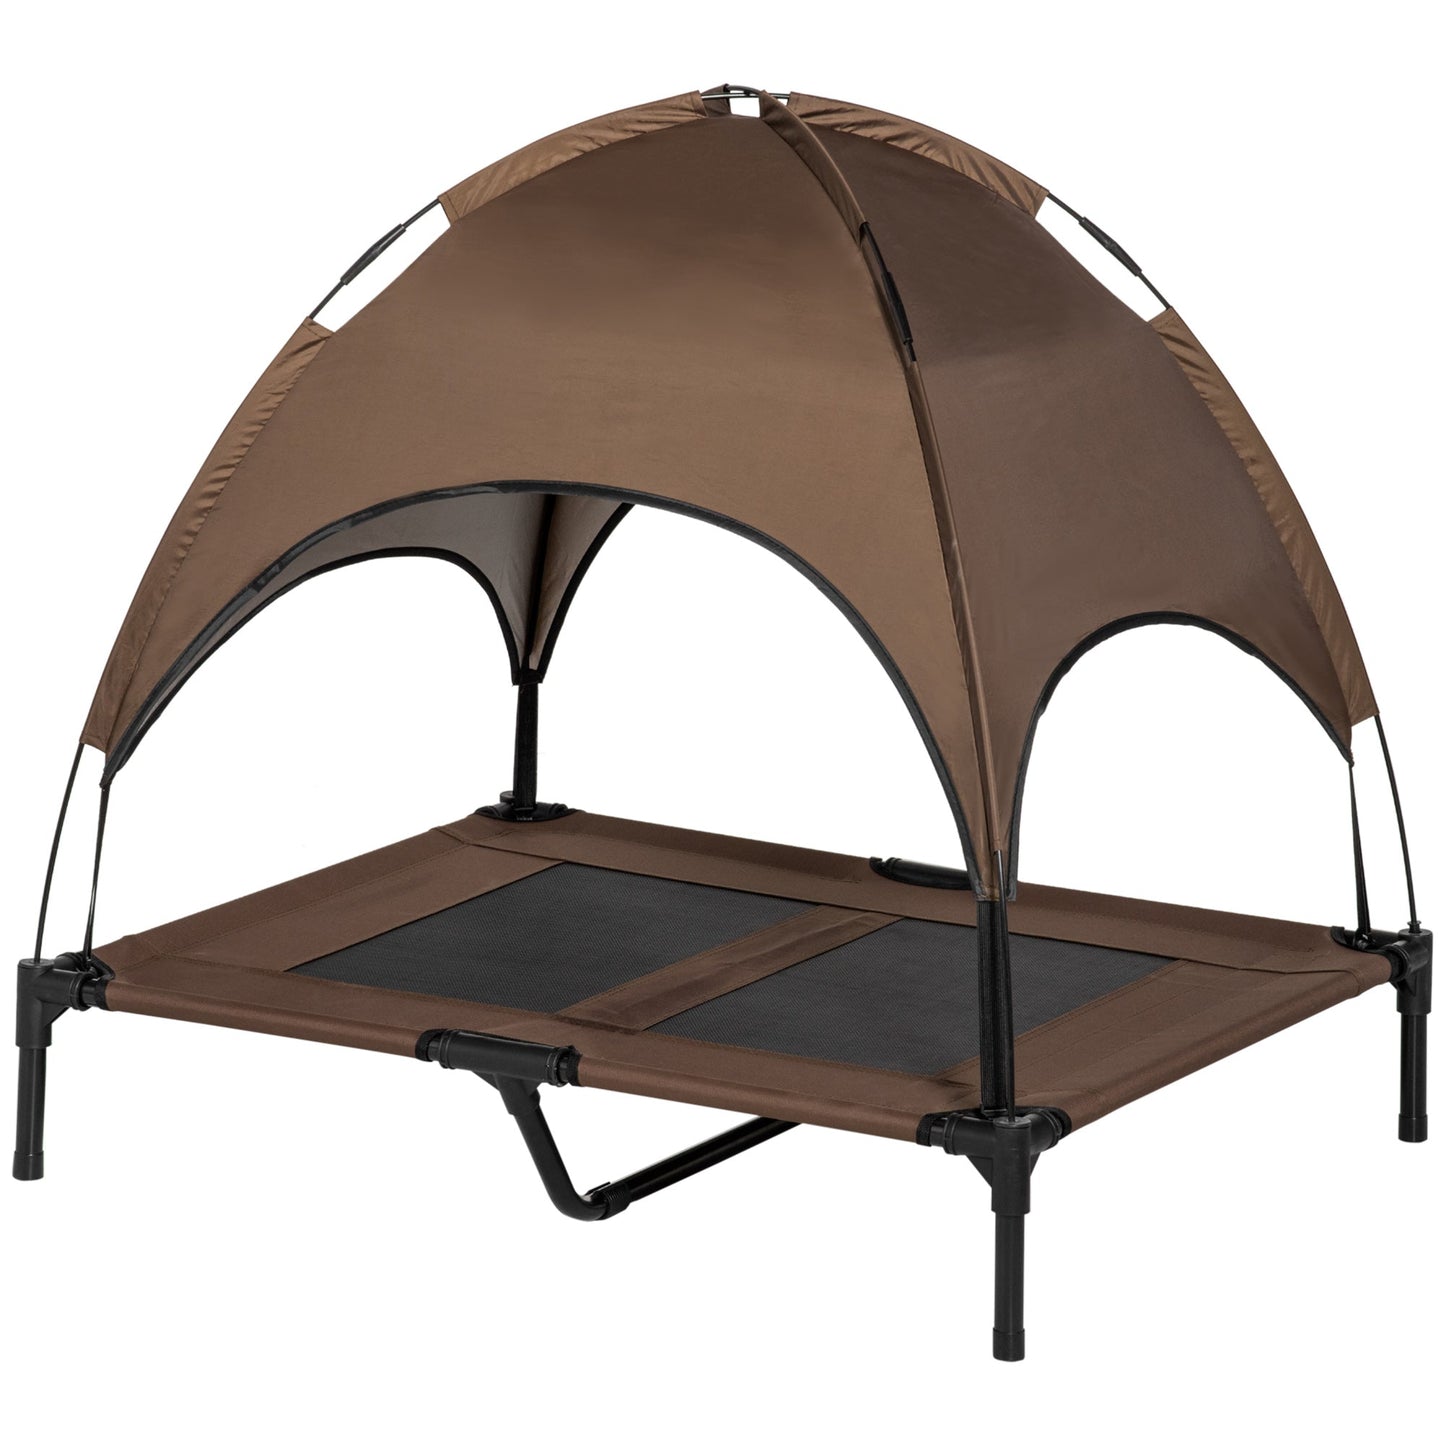 -PawHut Elevated Portable Dog Cot Pet Bed with UV Protection Canopy Shade, 36 inch, Coffee - Outdoor Style Company